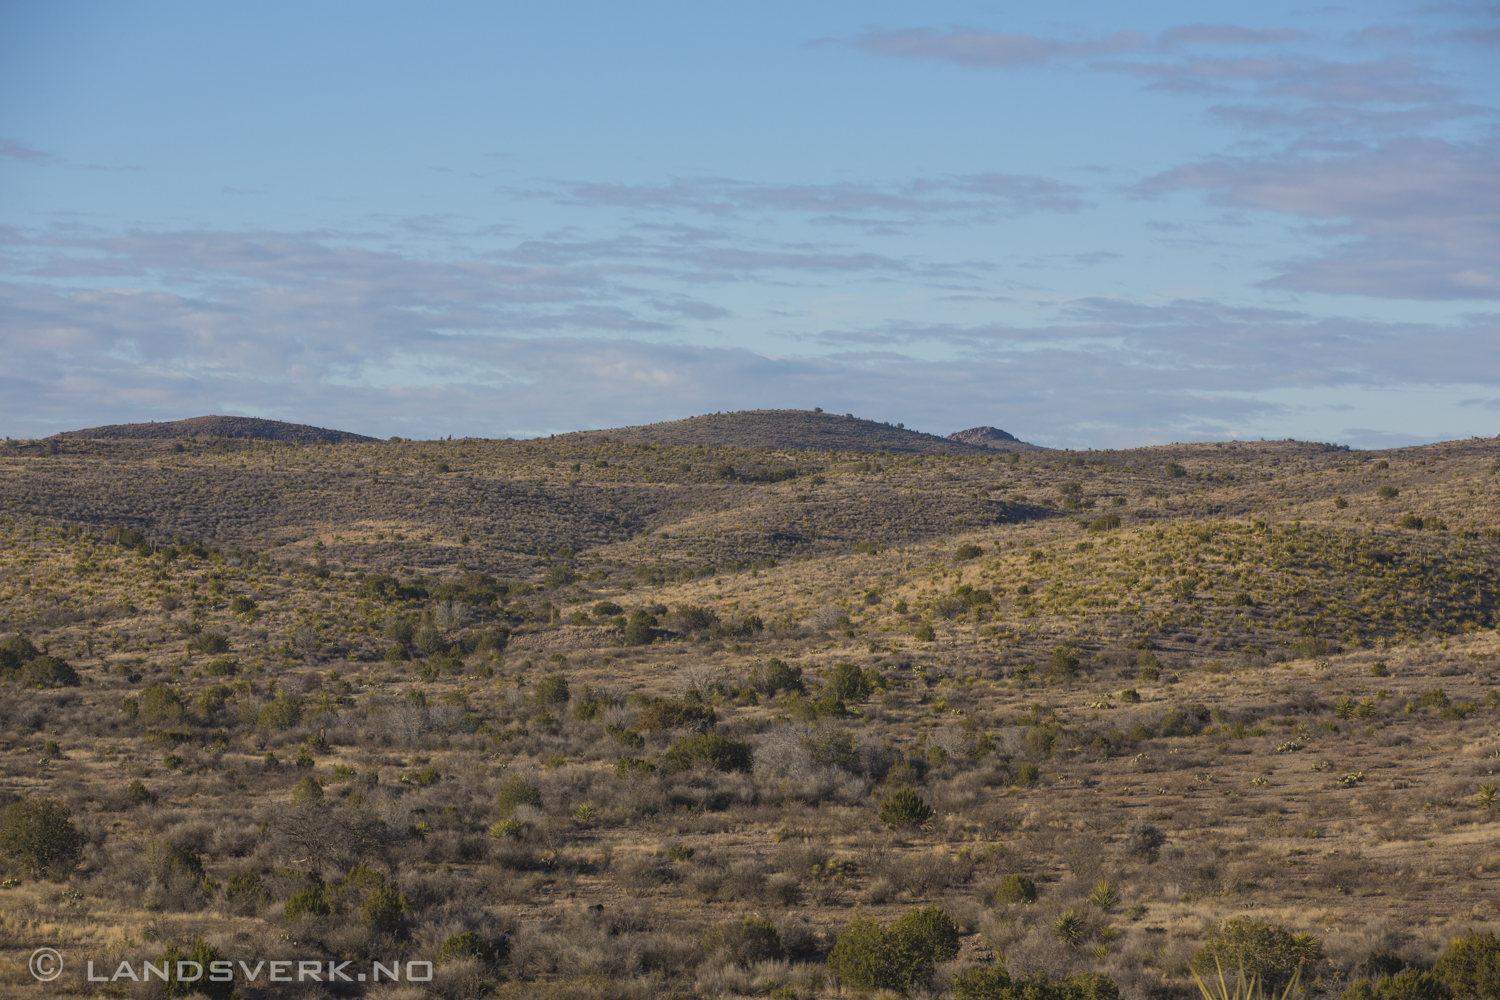 Driving home to Marfa from Shafter, Texas. 

(Canon EOS 5D Mark III / Canon EF 70-200mm f/2.8 L IS II USM)